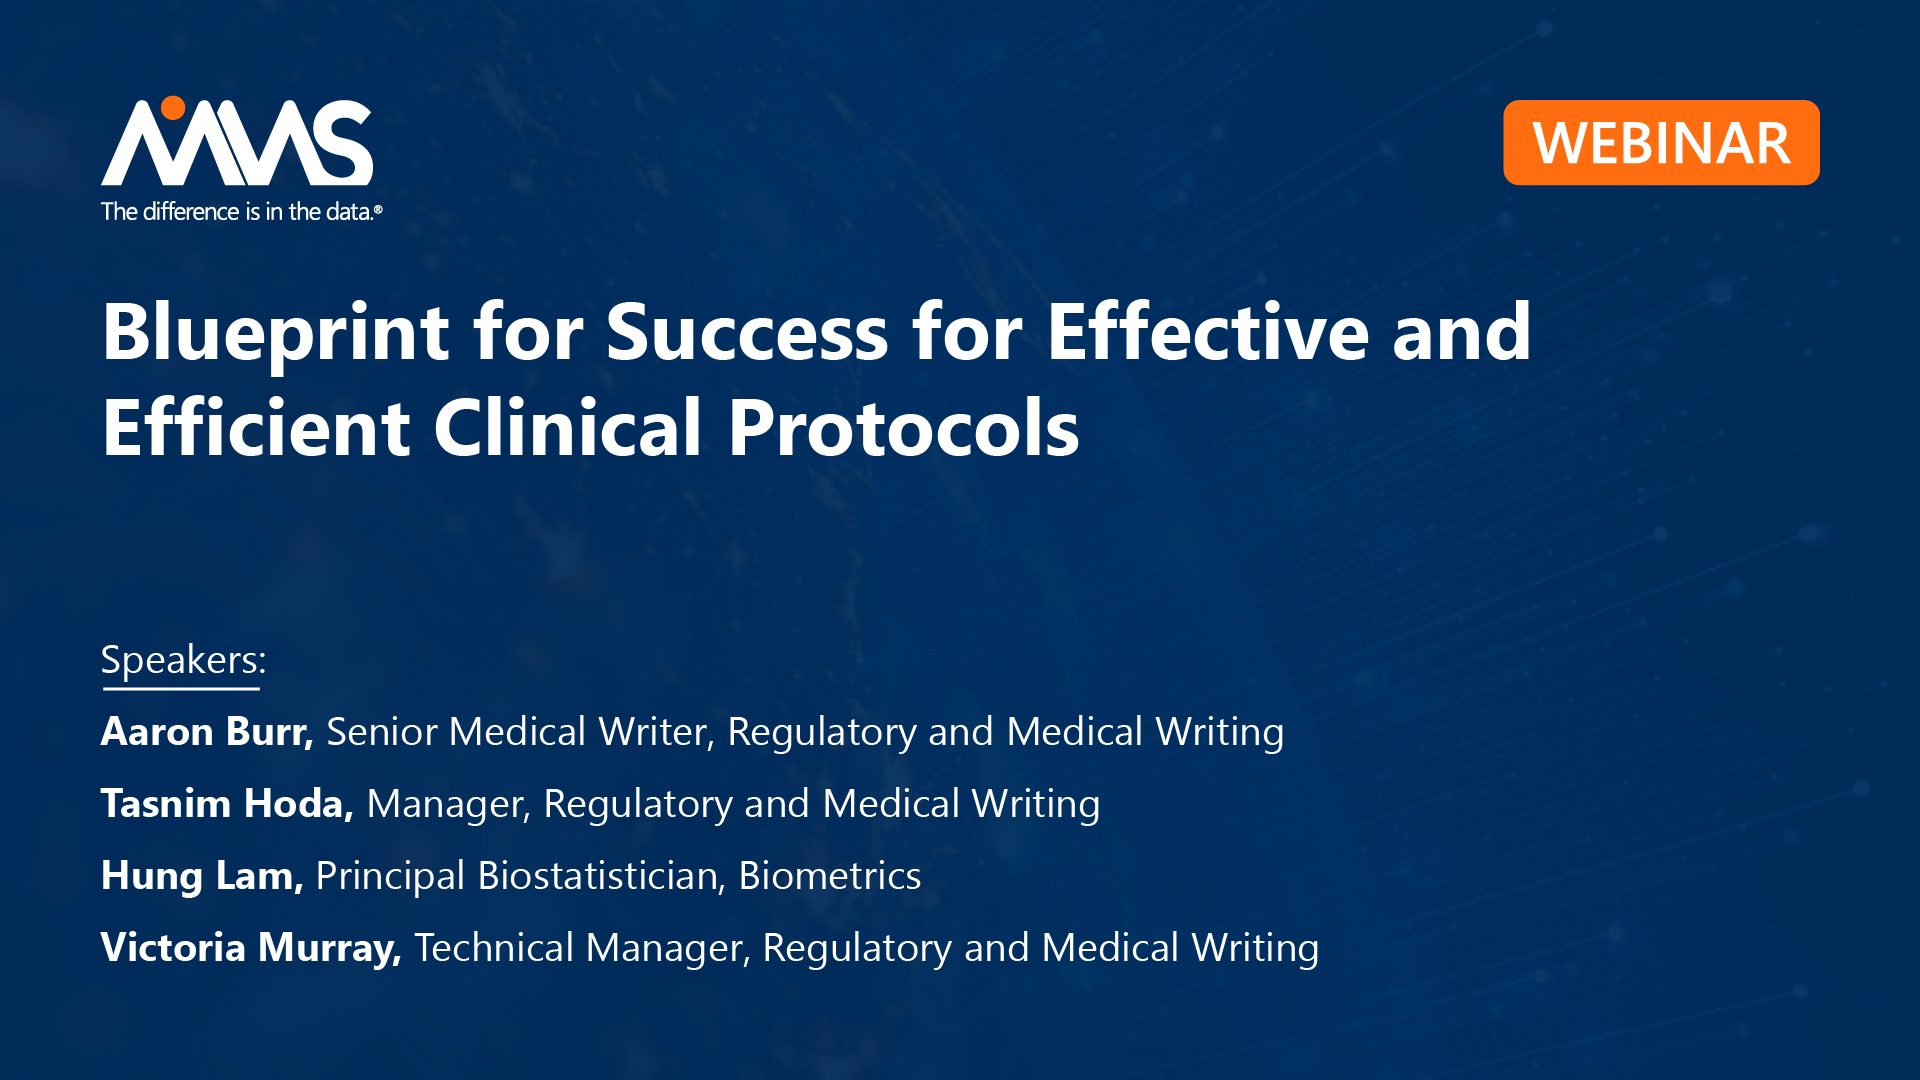 The Blueprint for Success for Effective and Efficient Clinical Protocols